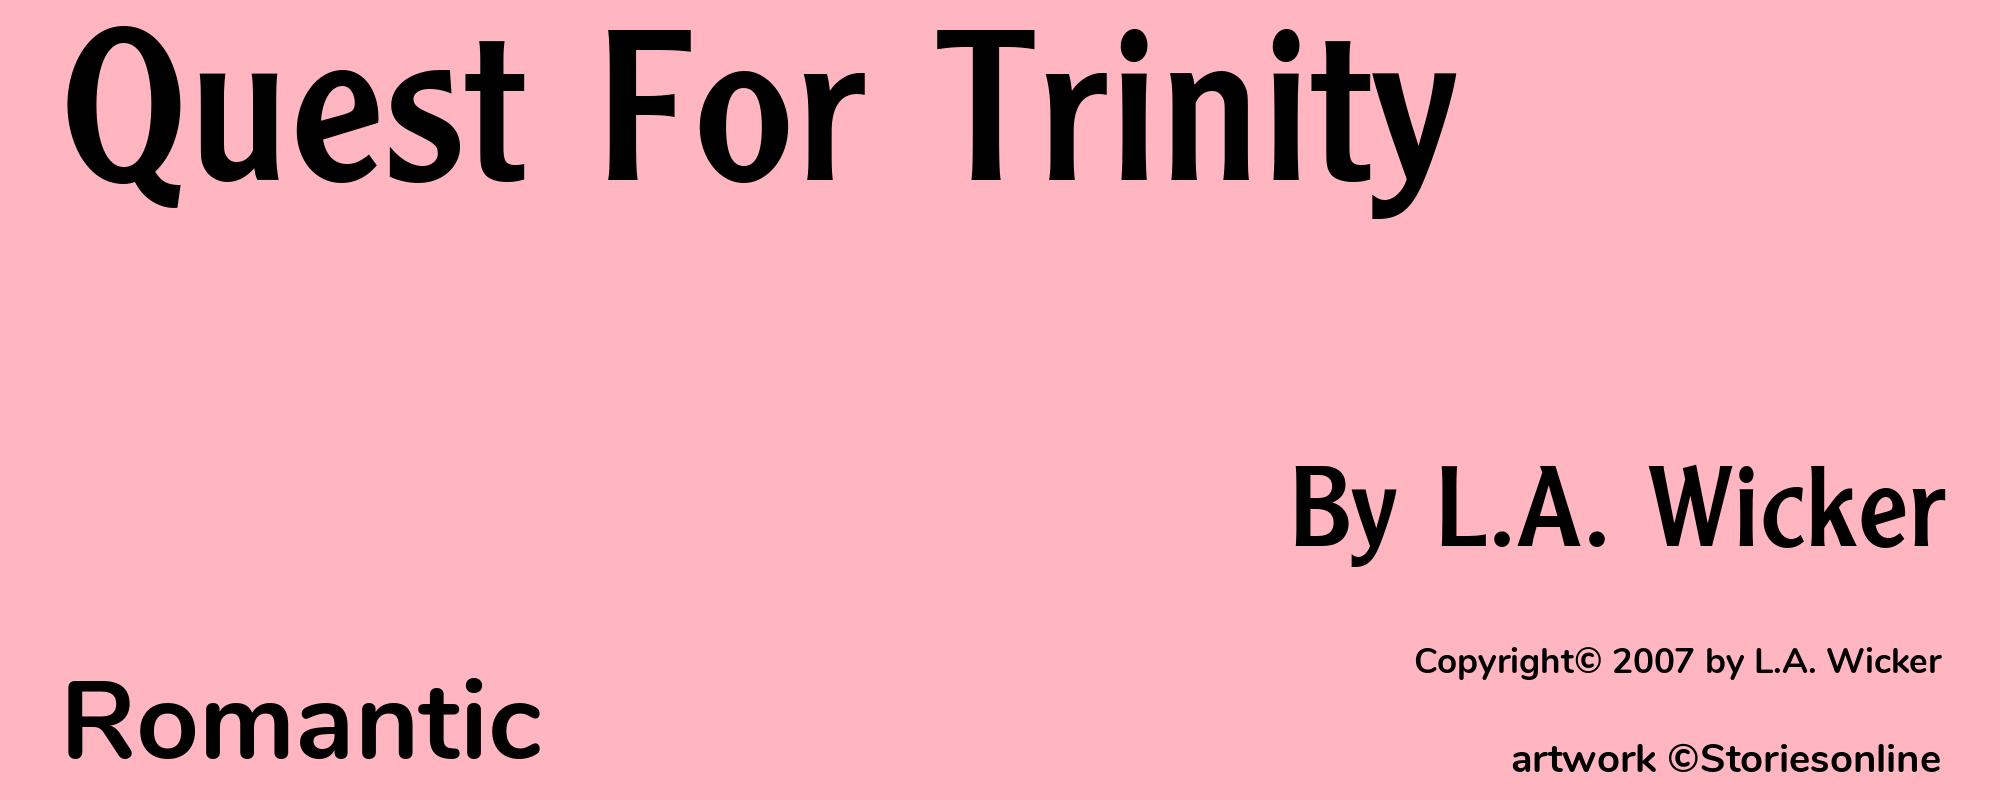 Quest For Trinity - Cover